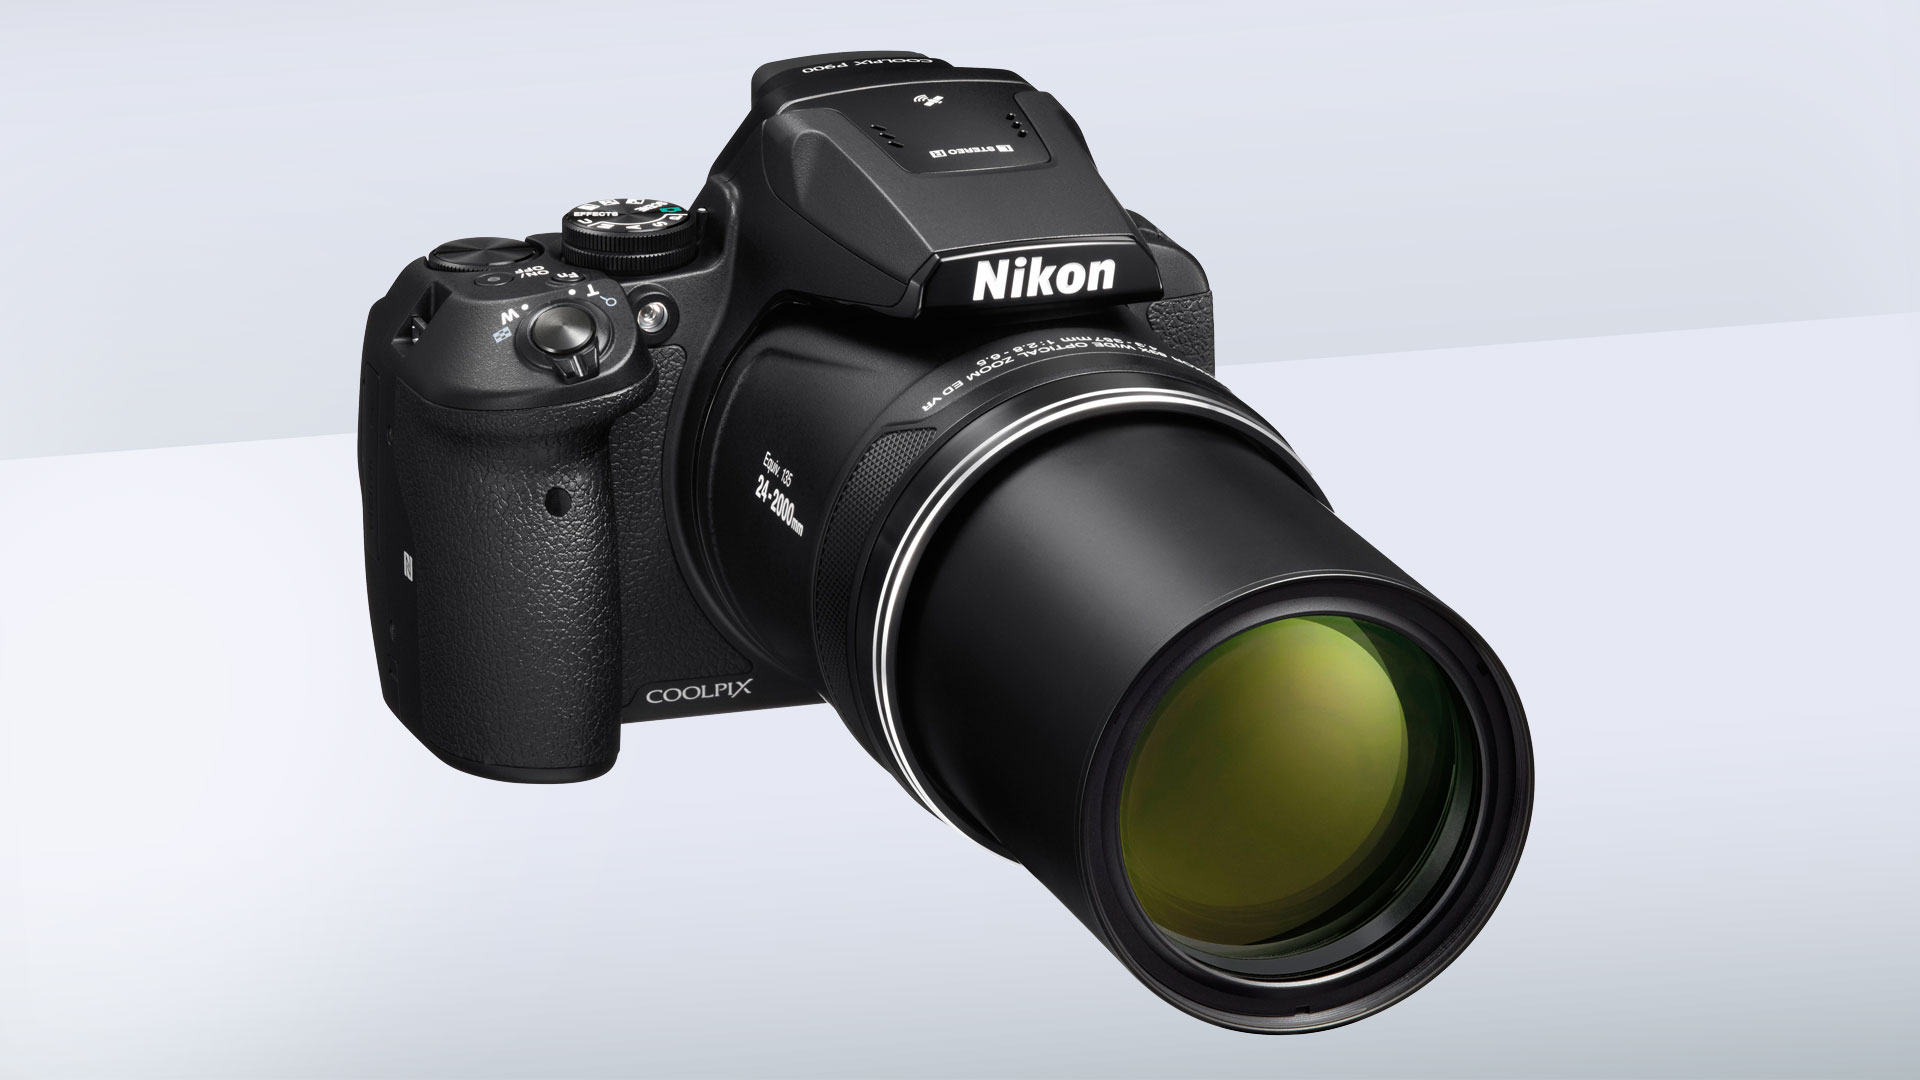 Best Nikon camera 2020: the 10 finest cameras from Nikon's line-up 16